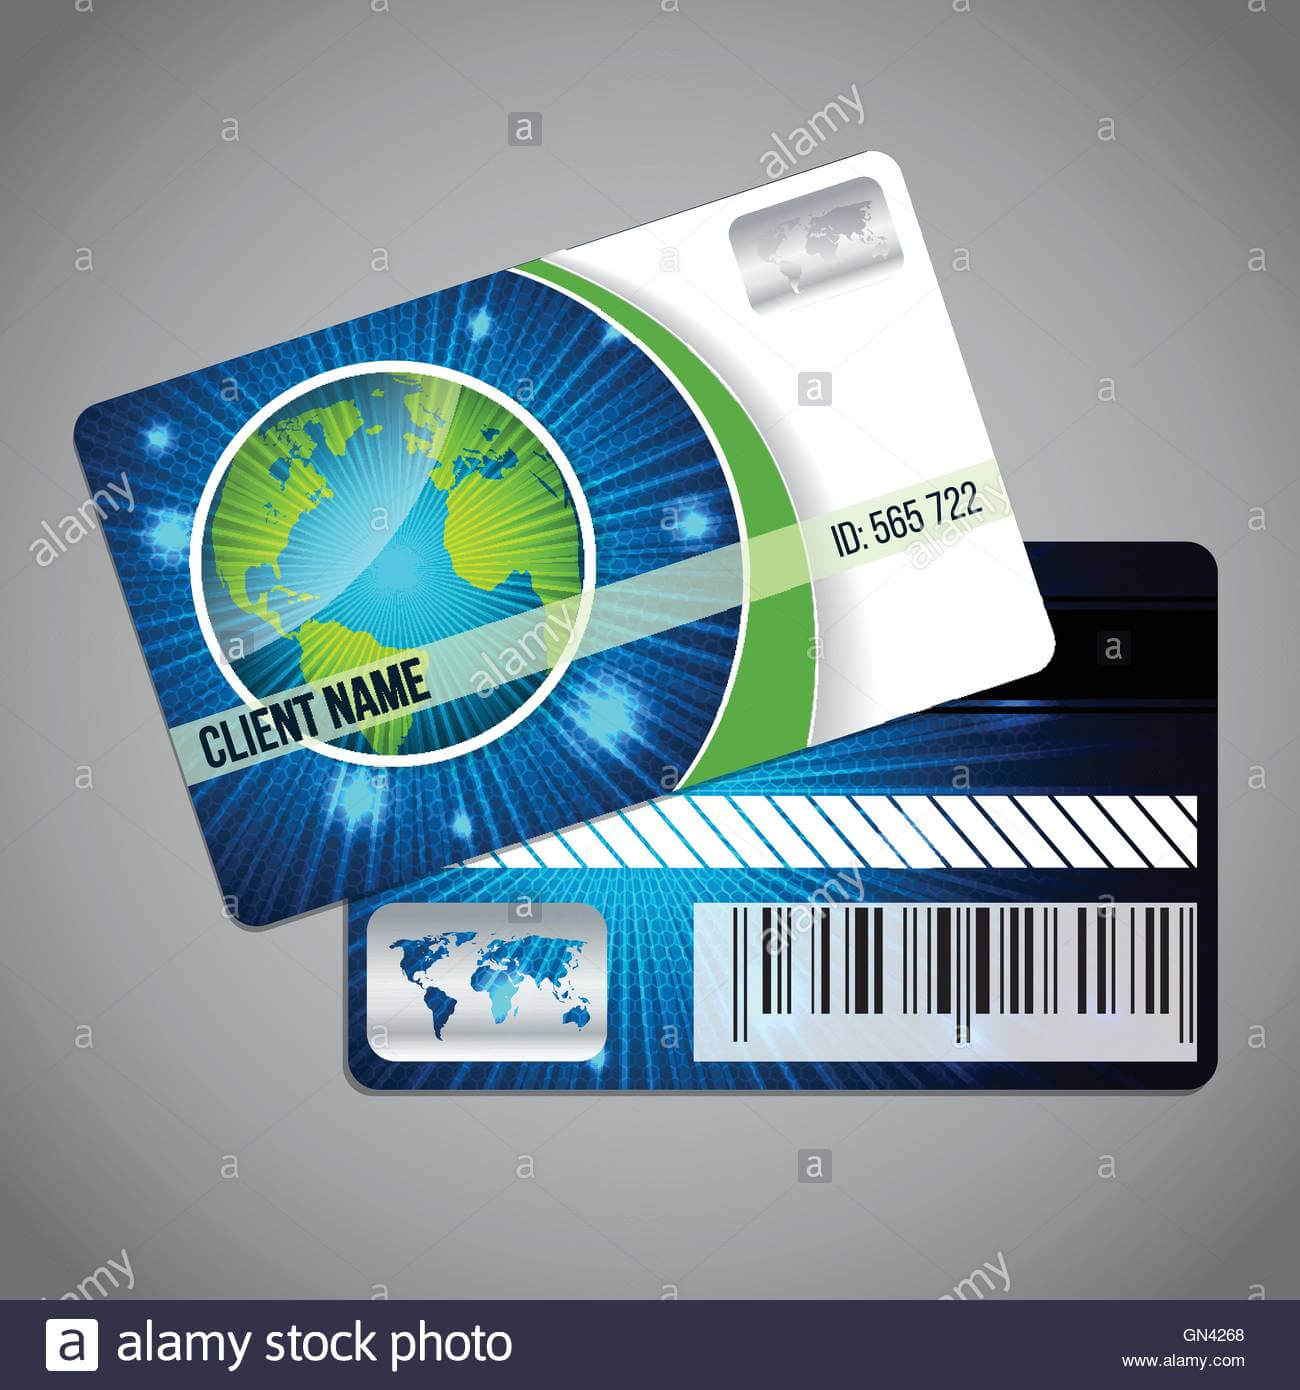 Loyalty Card With Globe Stock Vector Art & Illustration Throughout Loyalty Card Design Template